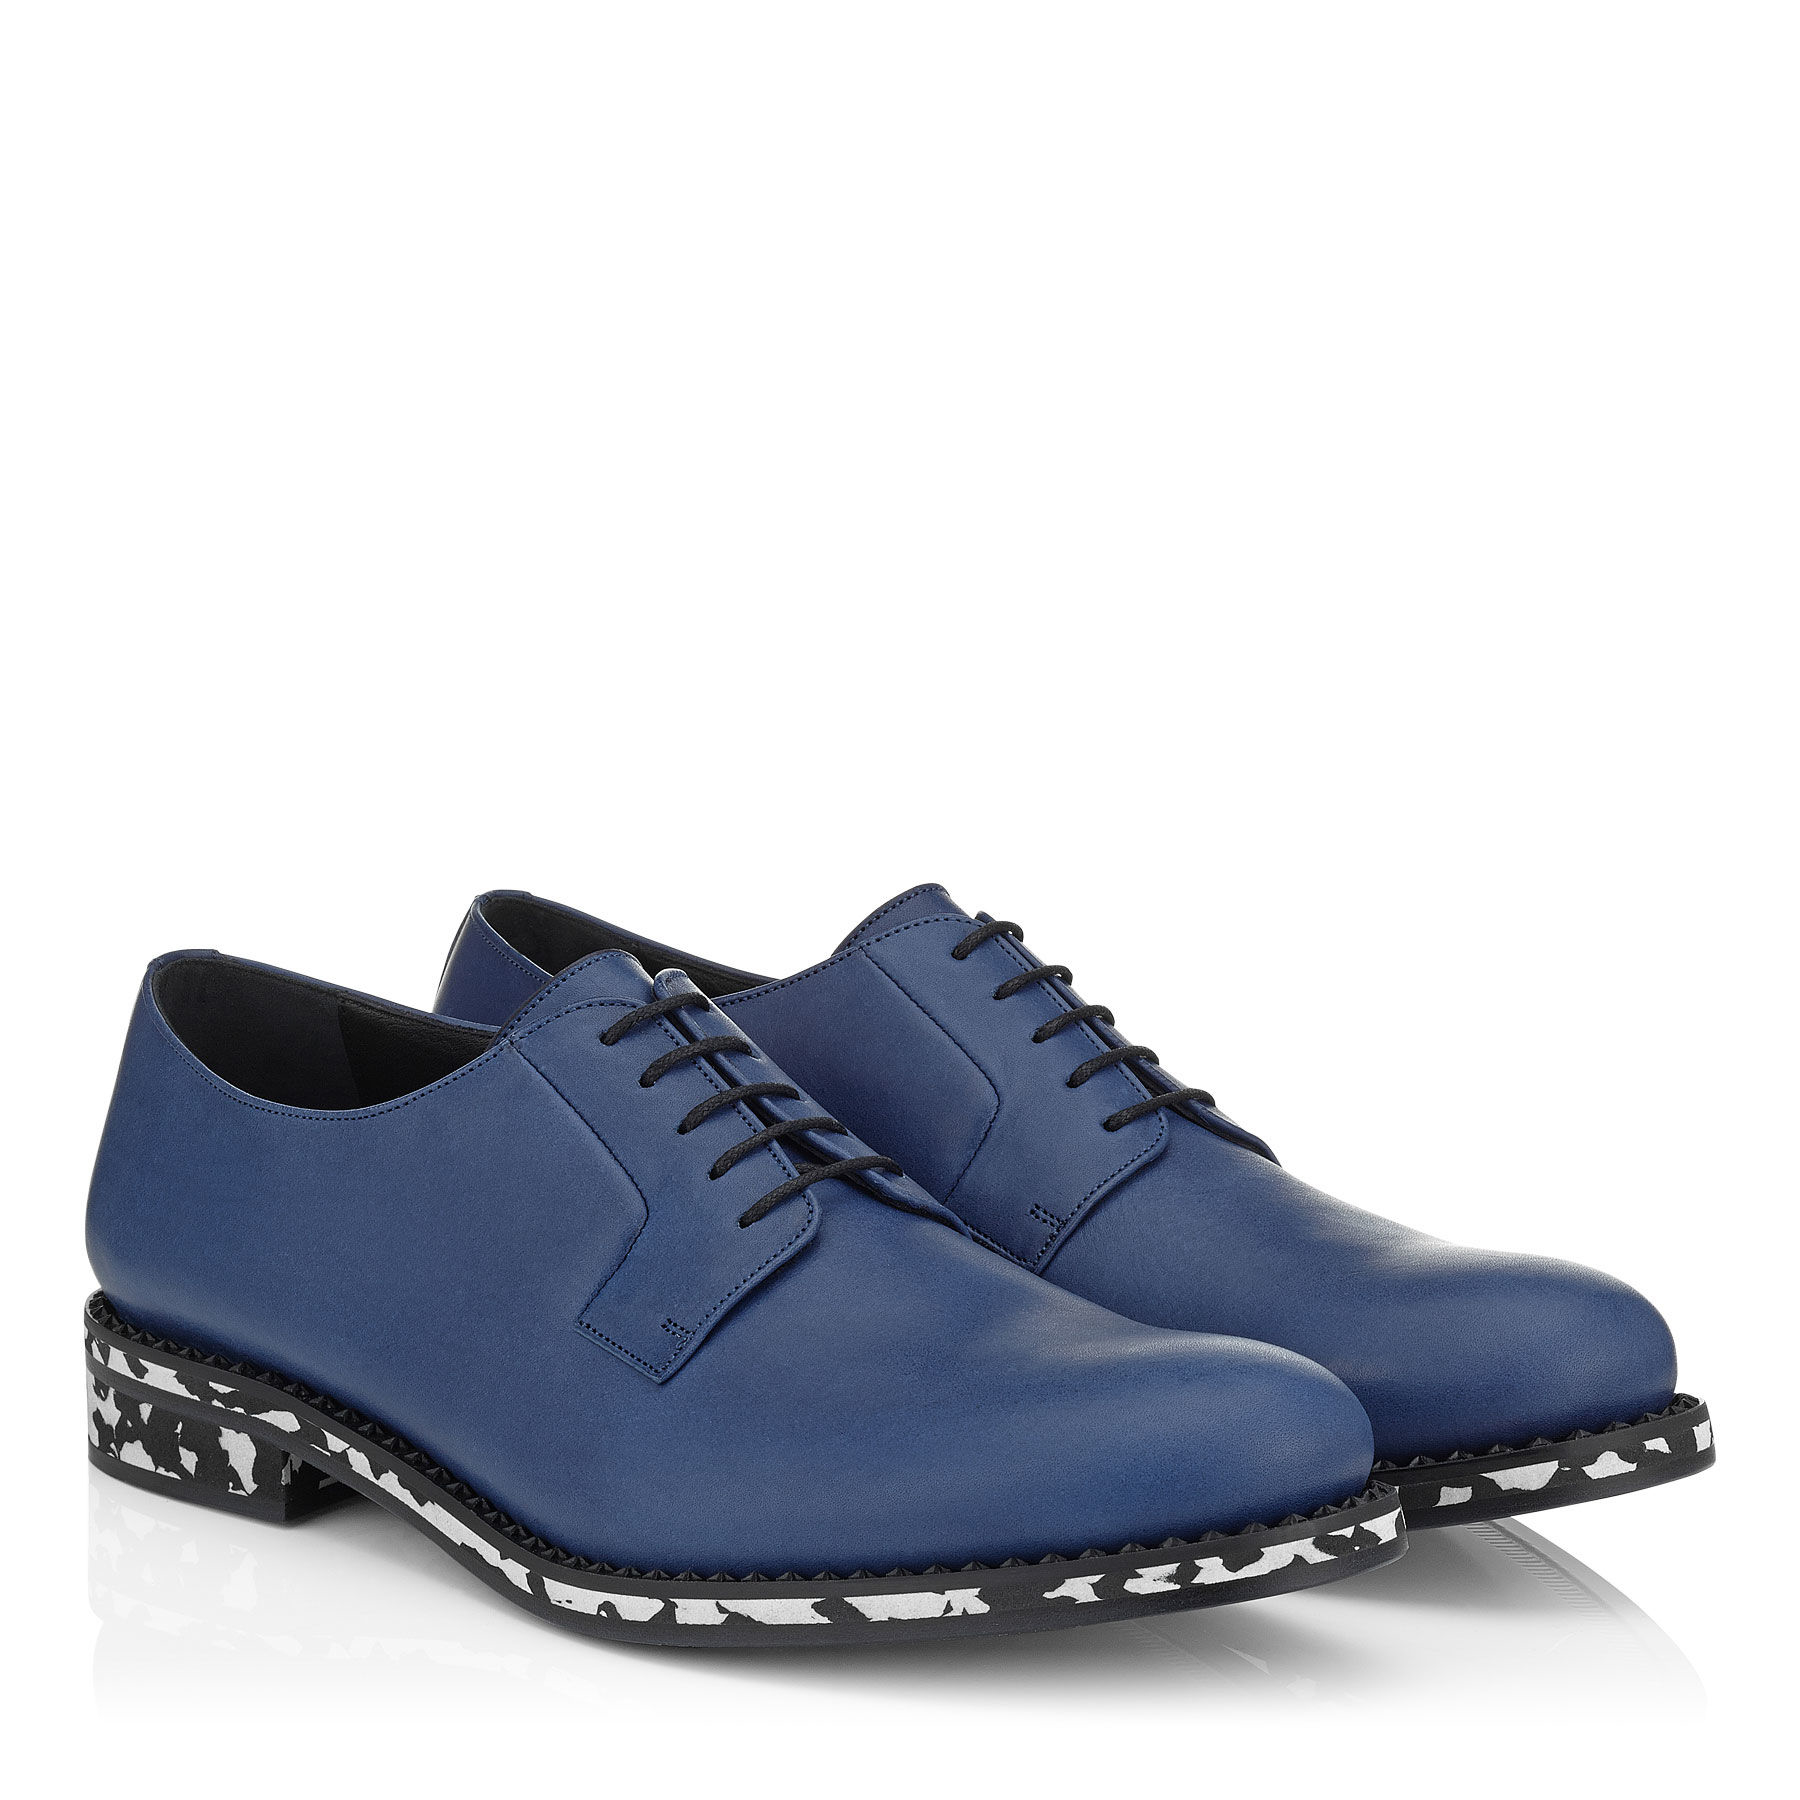 Jimmy Choo Alaric Sea Blue Lace Up Shoes for Men - Lyst